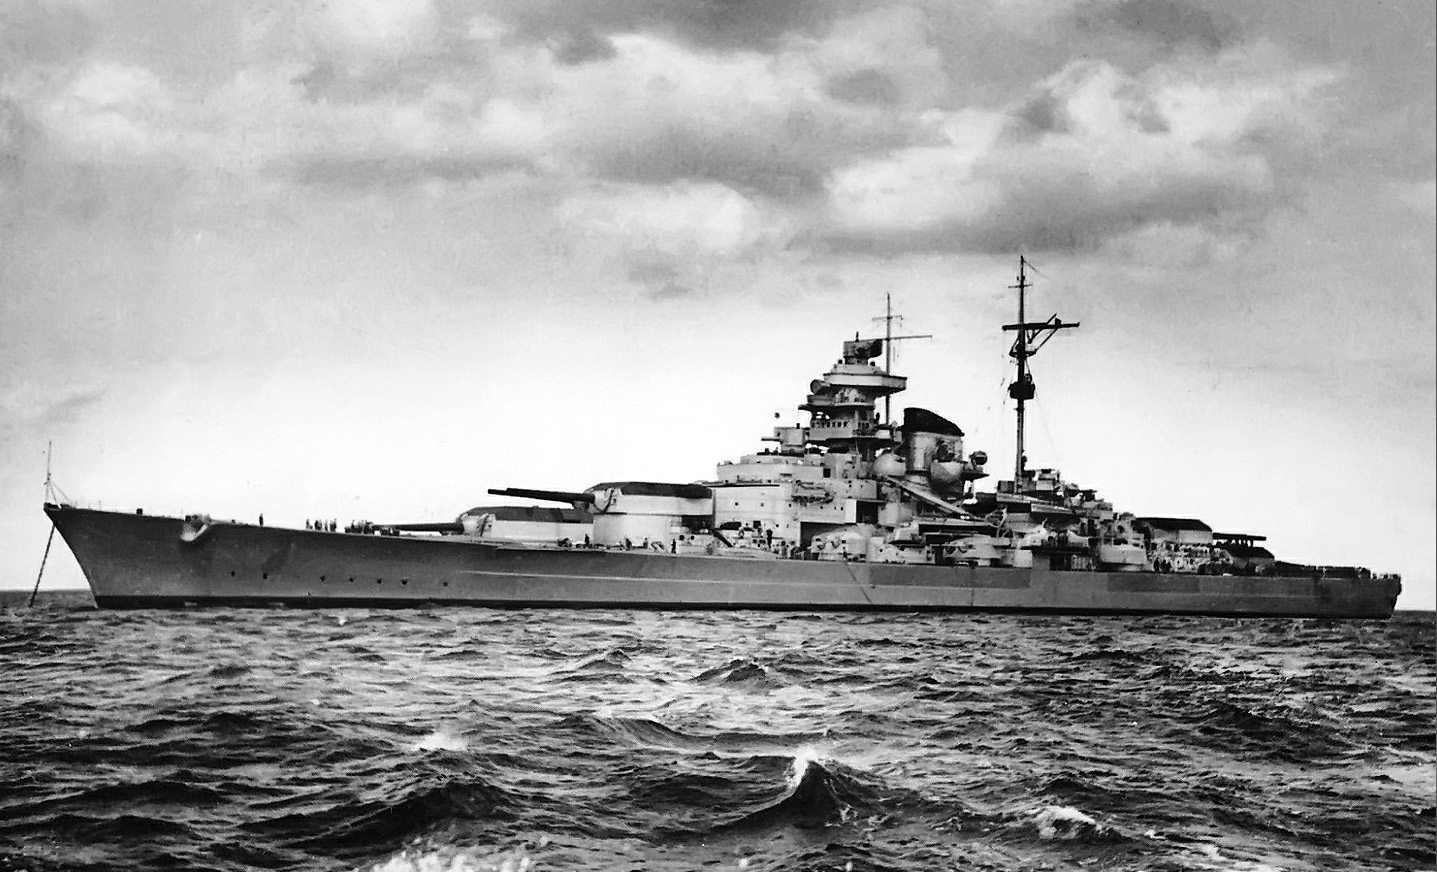 The Tirpitz constituted a “fleet in being” that tied up British Royal Navy and Royal Air Force resources delegated to countering the threat of the battleship sortieing from her Norwegian lair.